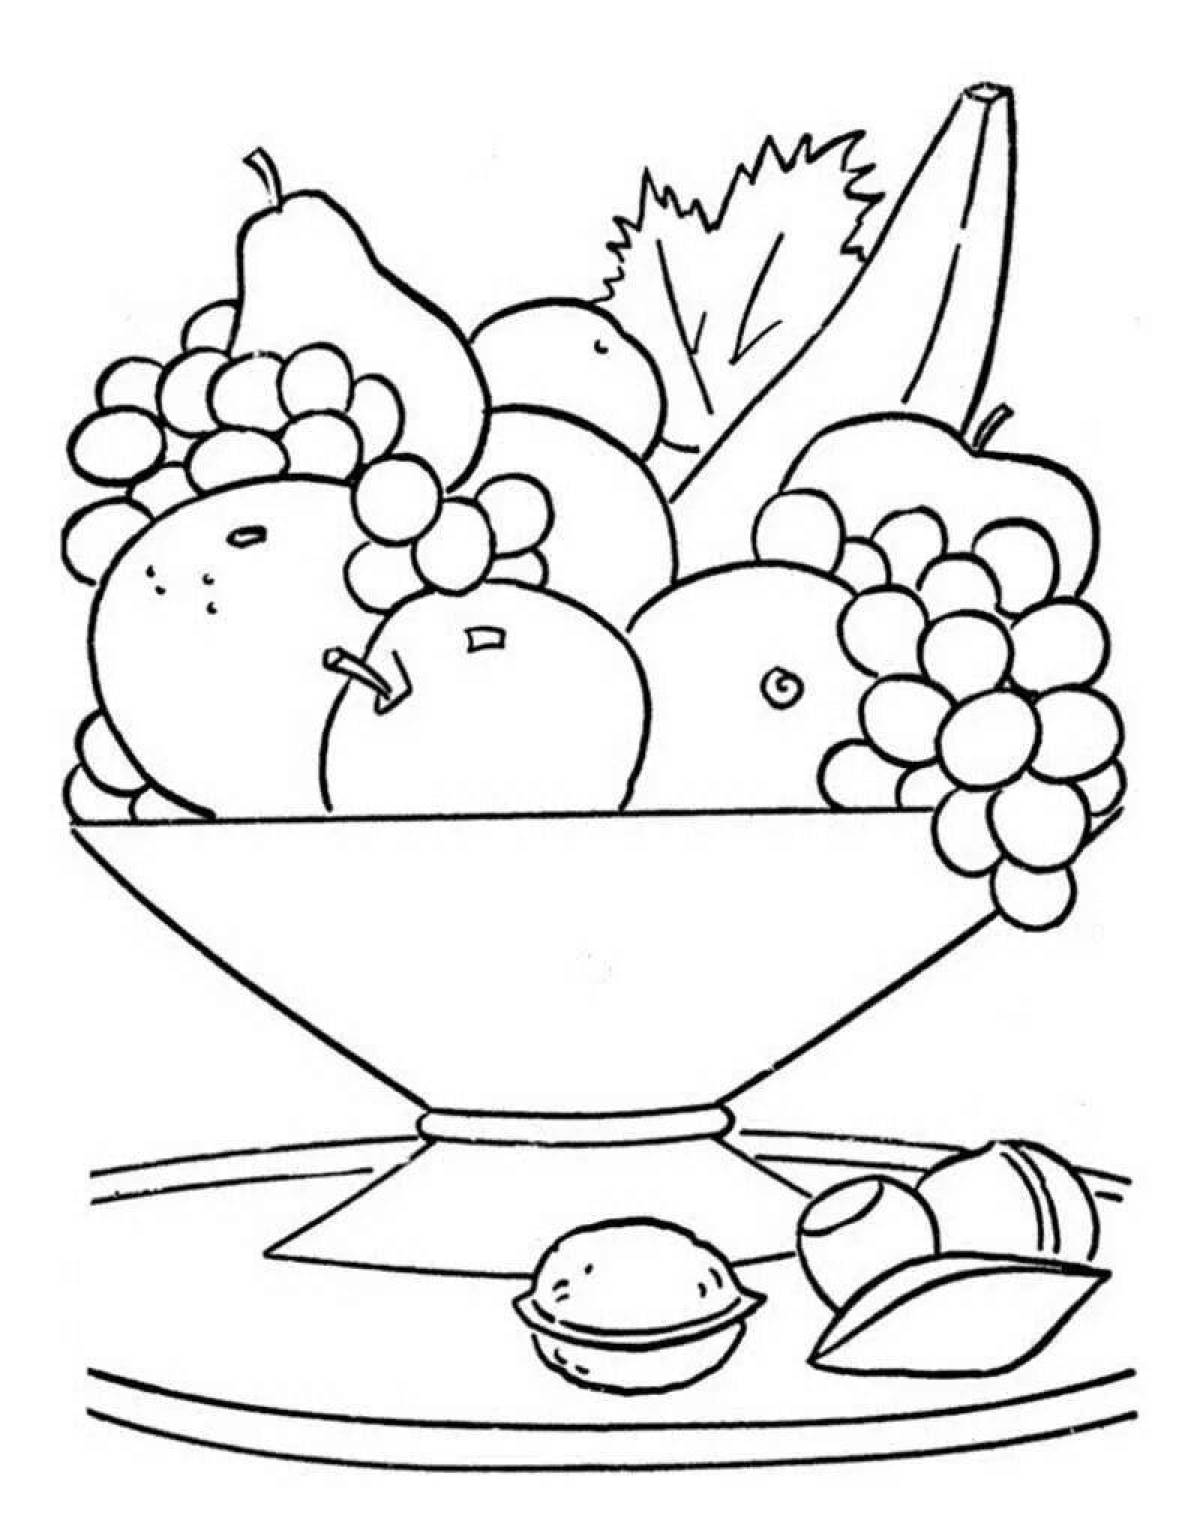 Coloring page excellent stats 6th grade